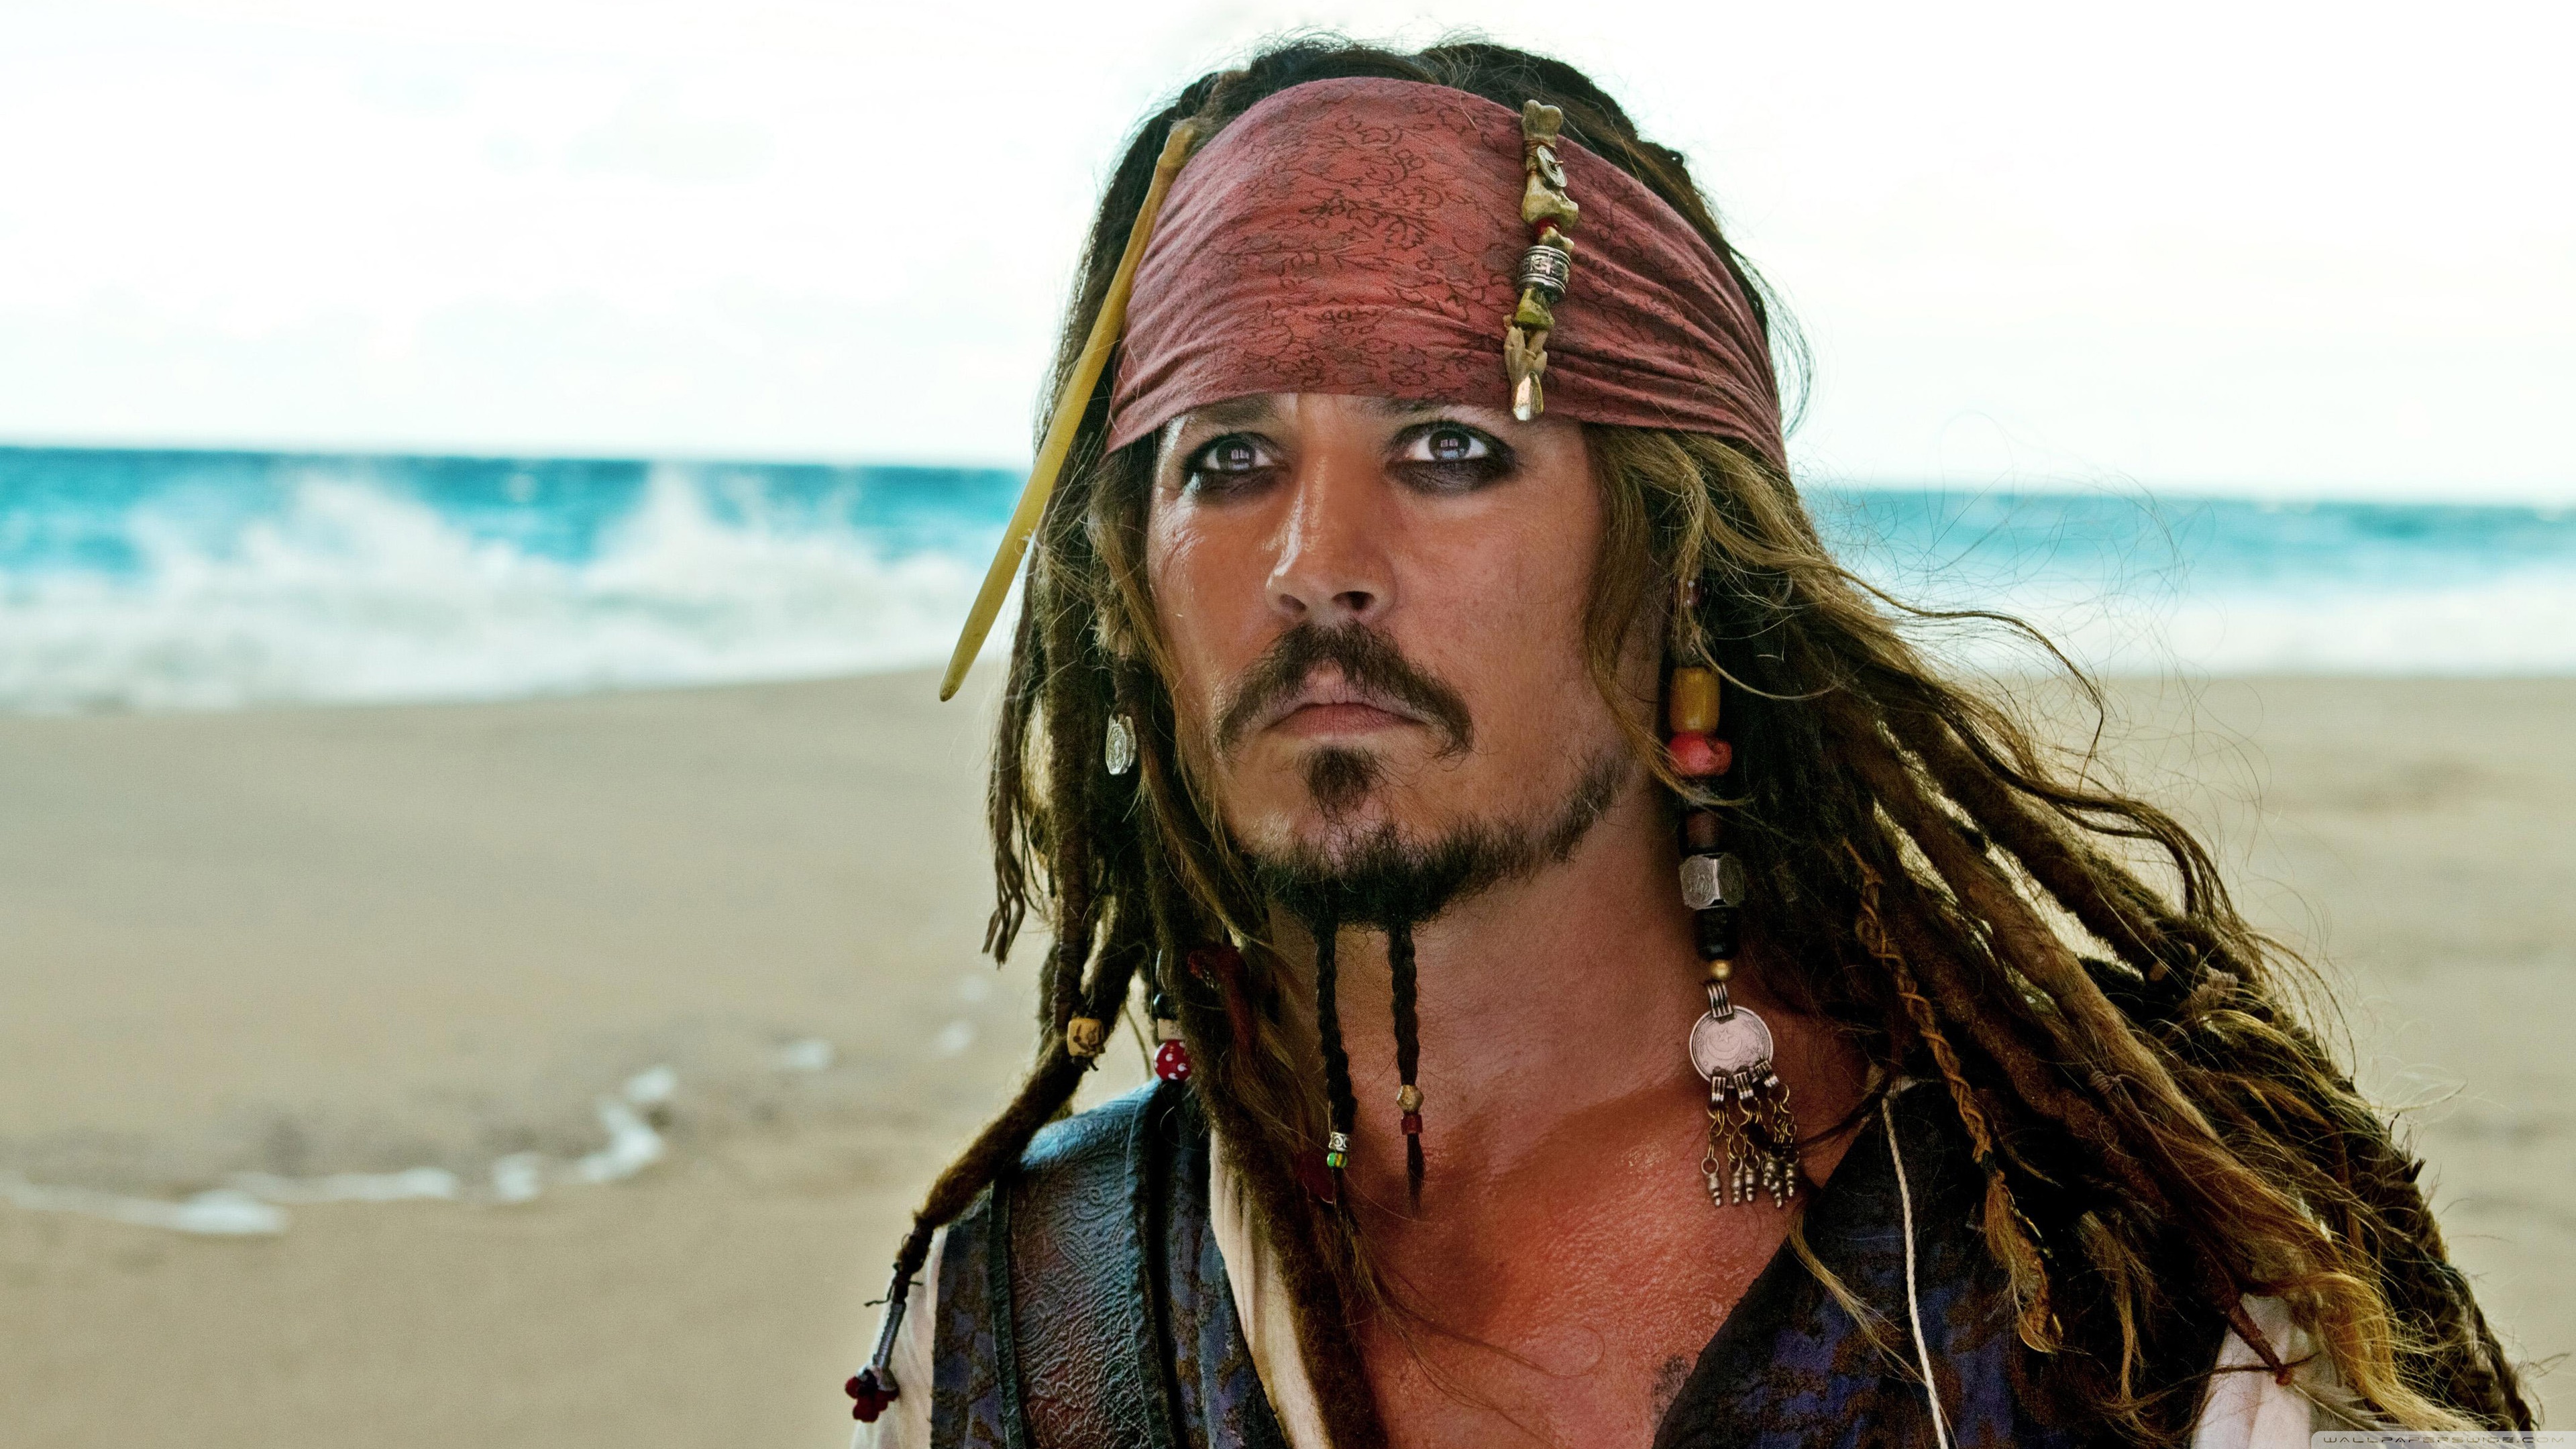 Jack Sparrow Wallpaper for 2880x1920